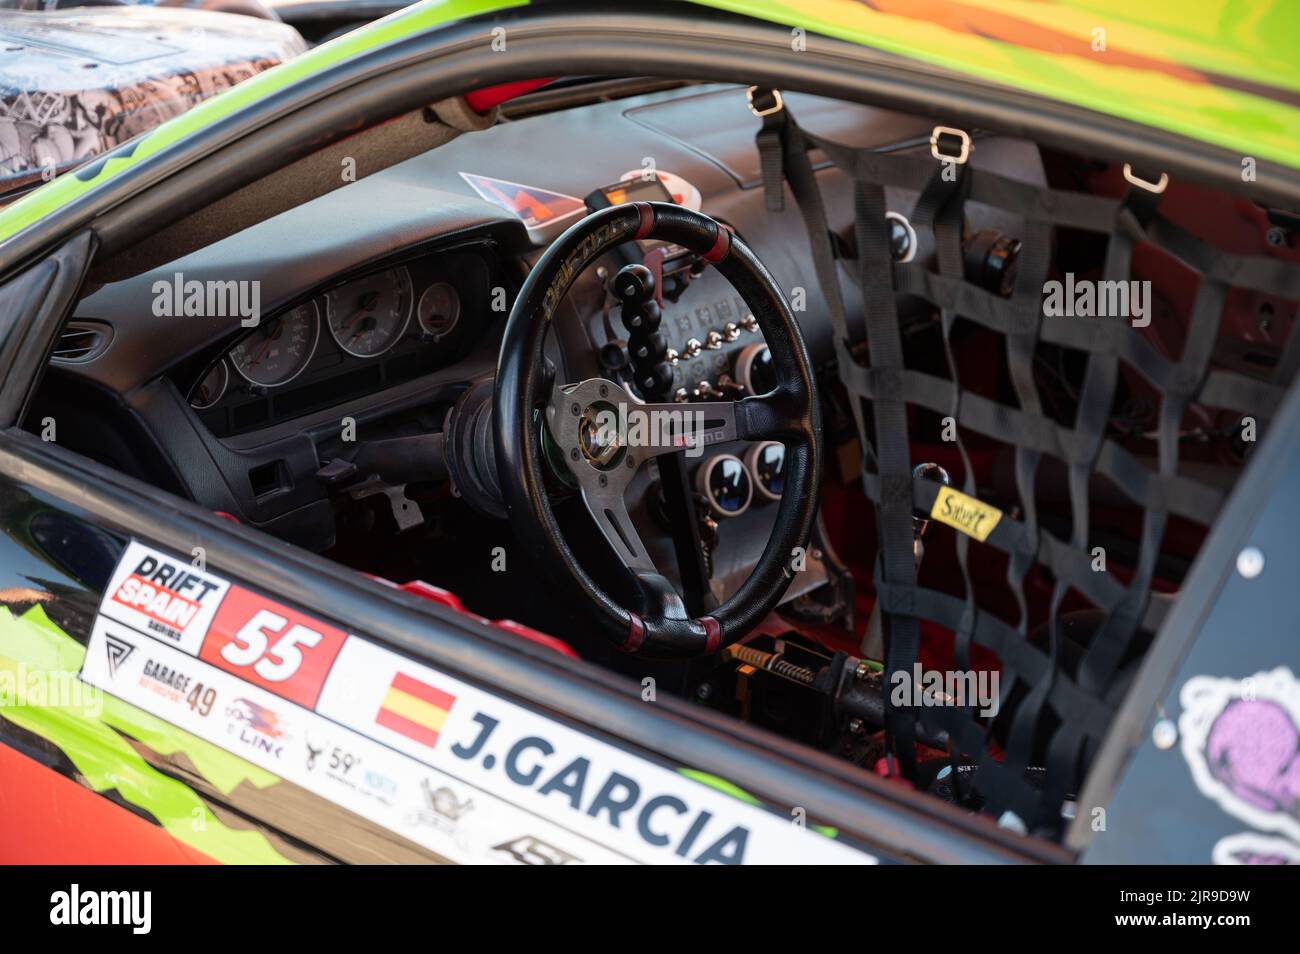 A detail of an interior of a Nissan Silvia S14 5 prepared for drifting competitions Stock Photo